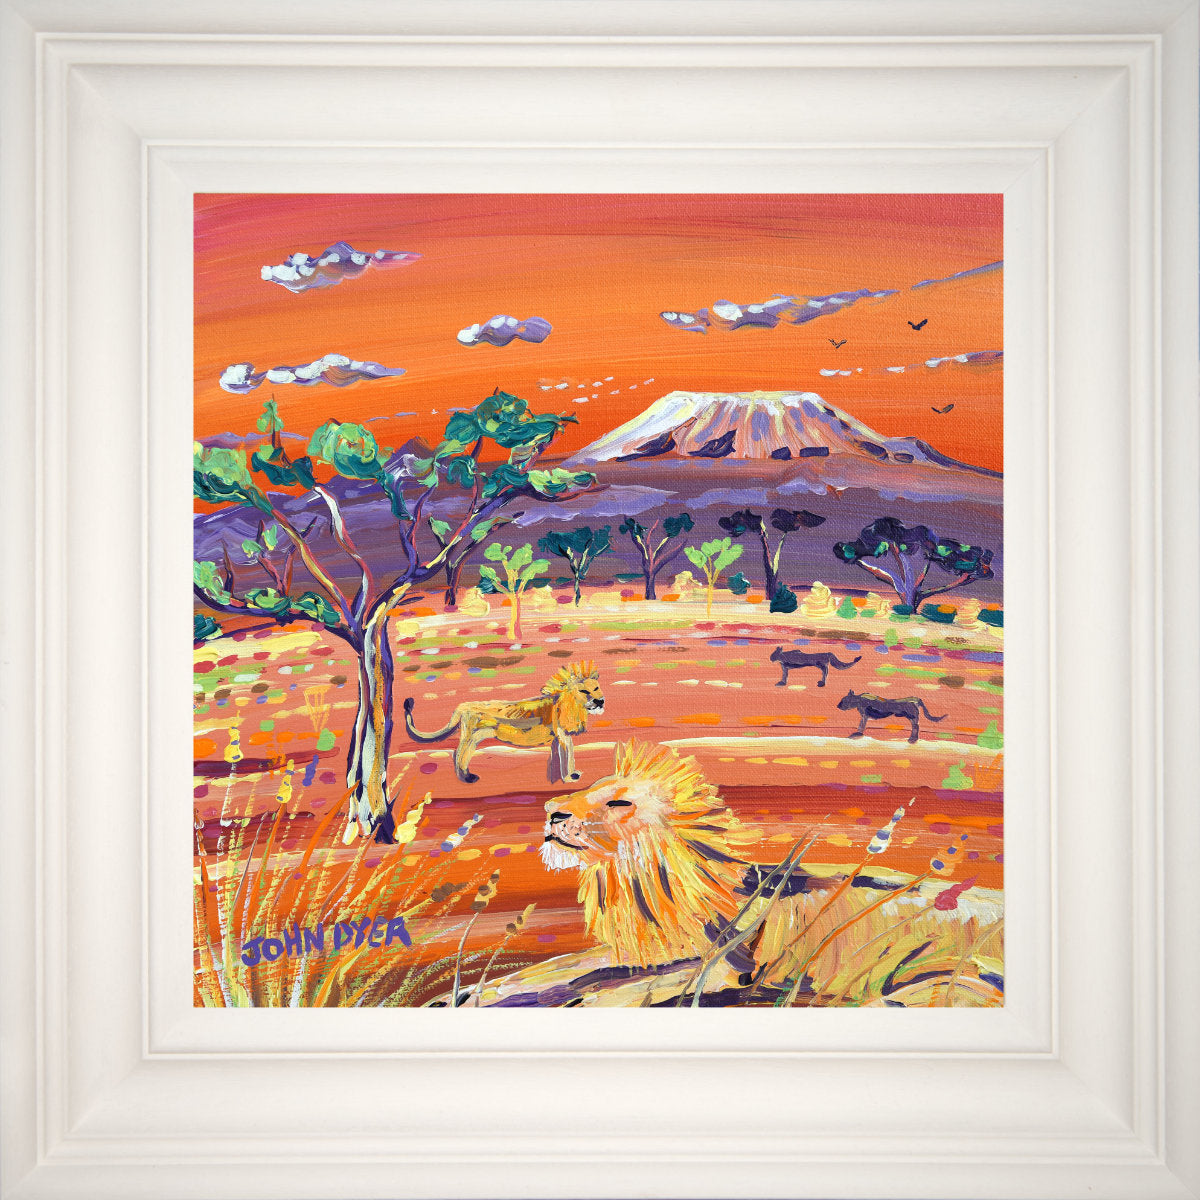 'Sunset Lions, Kenya', 12x12 inches acrylic on canvas. Paintings of Africa by British Artist John Dyer.